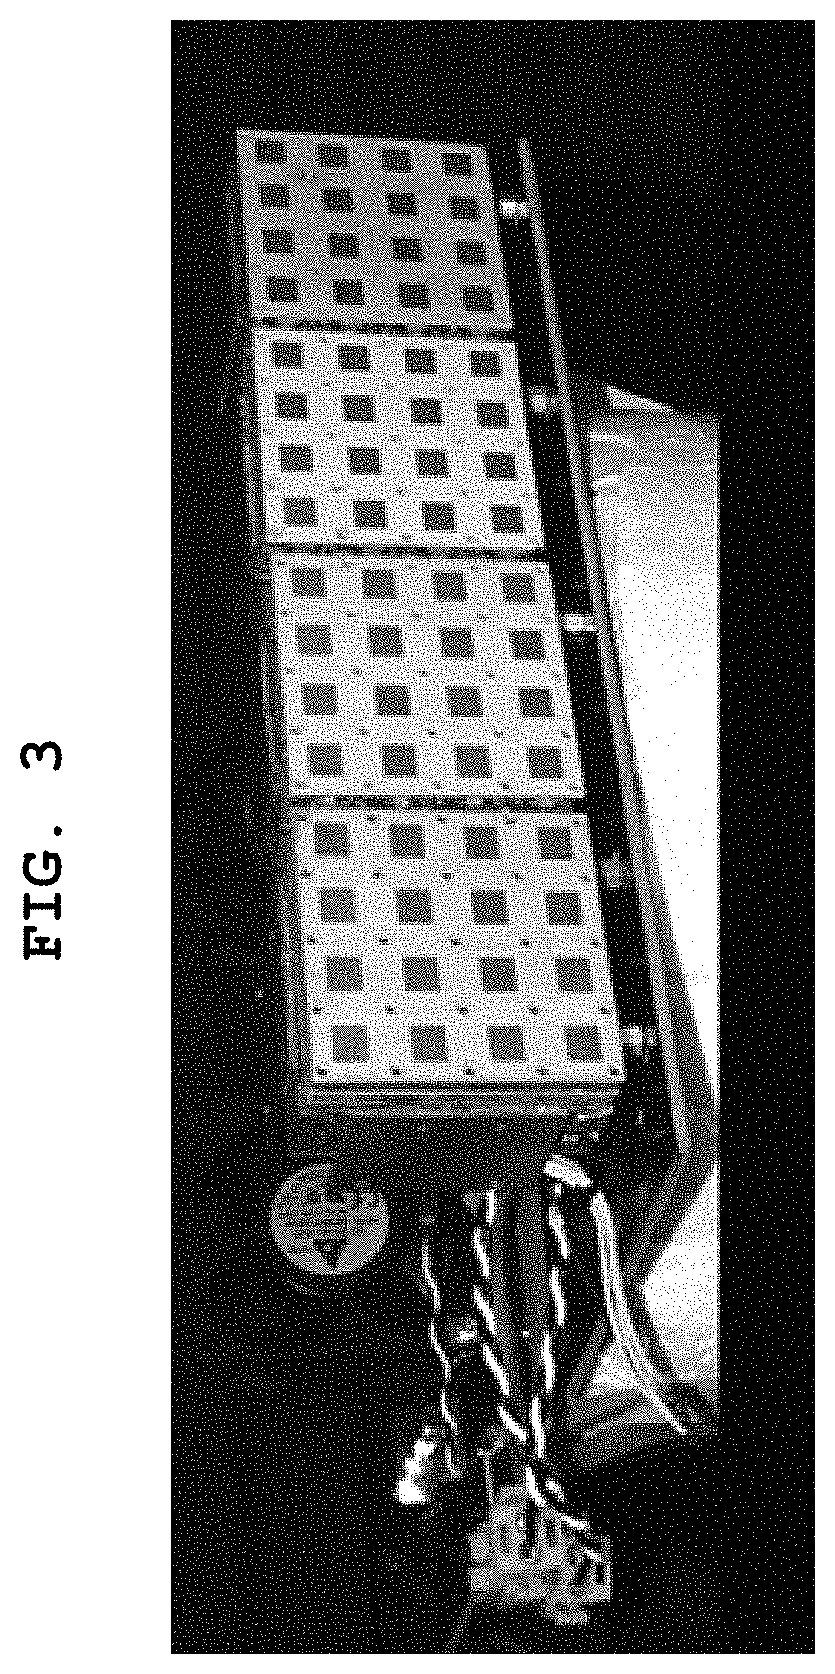 Tile structure of shape-adaptive phased array antenna